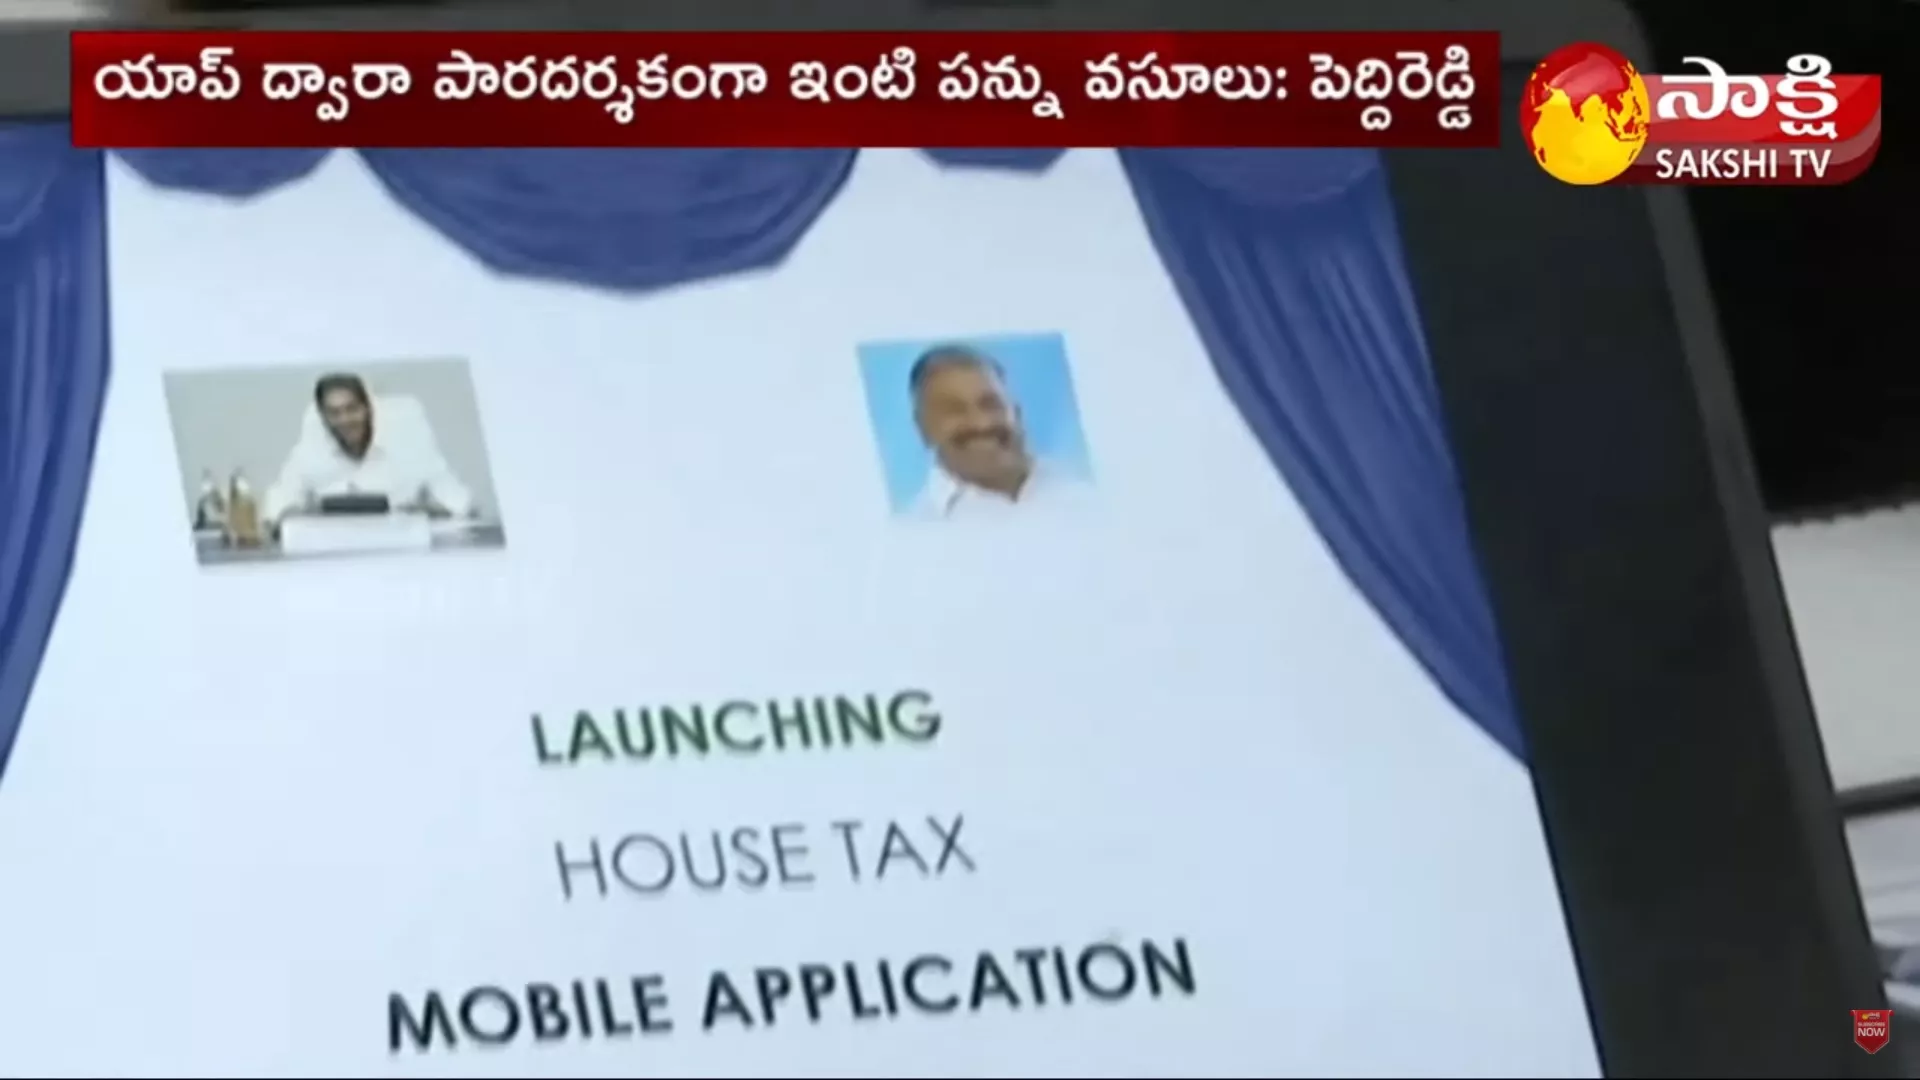 Minister Peddireddy Ramachandra Reddy Launched House Tax Mobile App